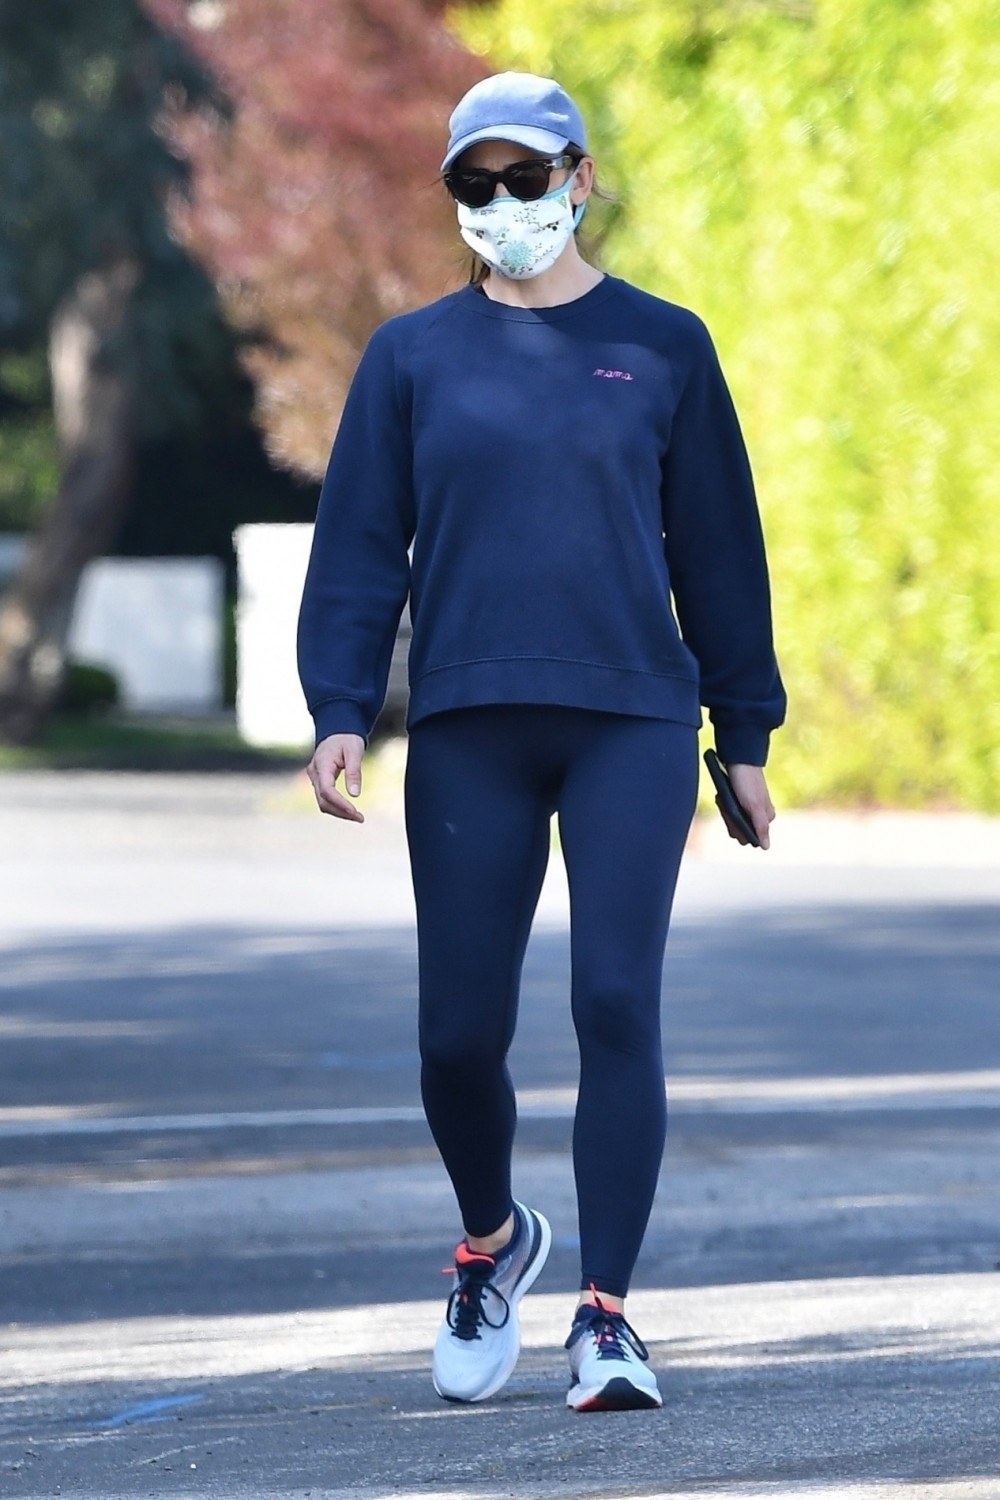 Jennifer Garner goes for a walk wearing a mask amid the recommendations that Americans cover their faces